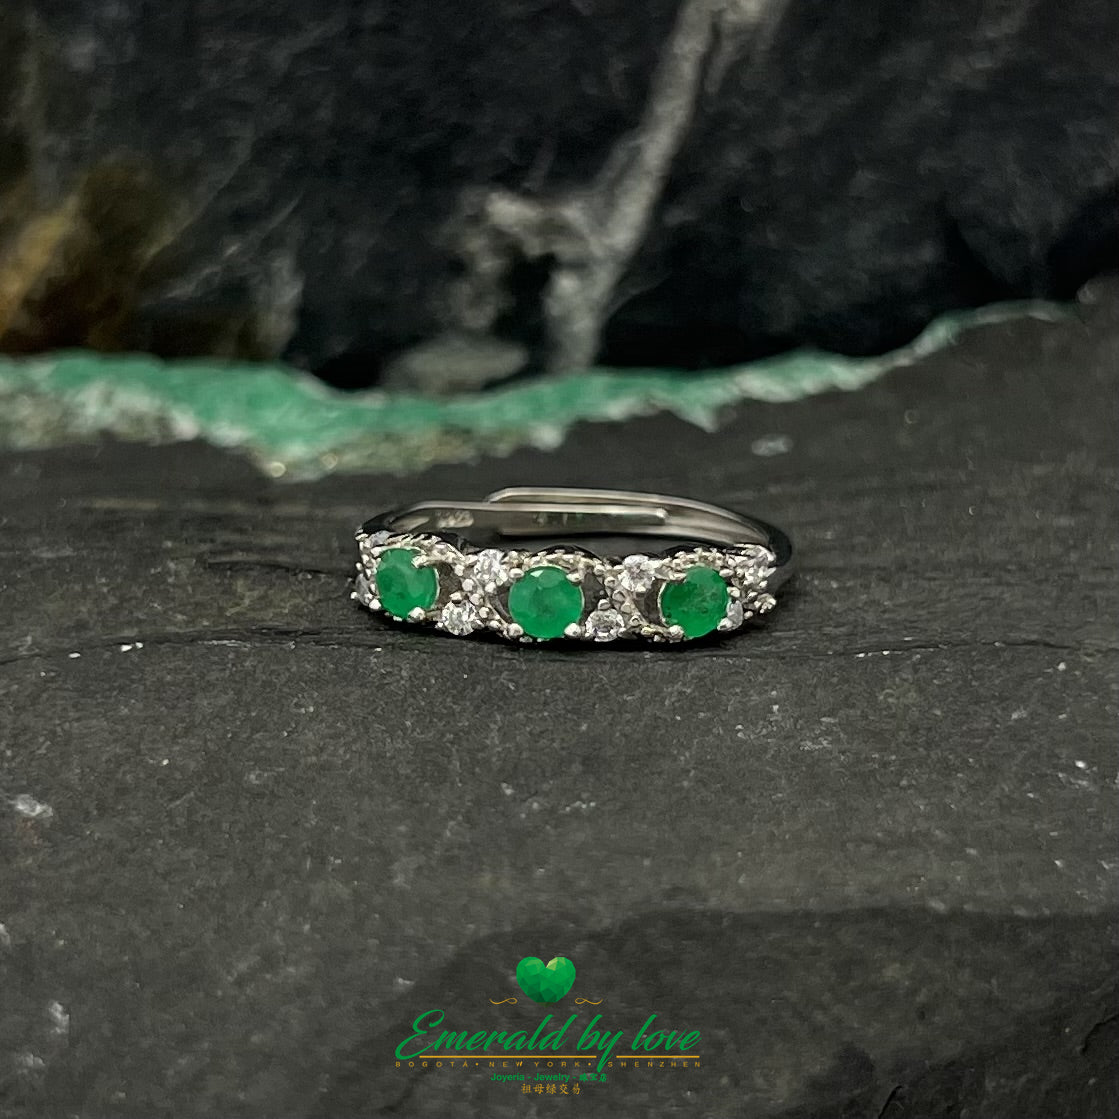 Curved Silver Band Ring with Interspersed Emeralds and Zirconia Accents